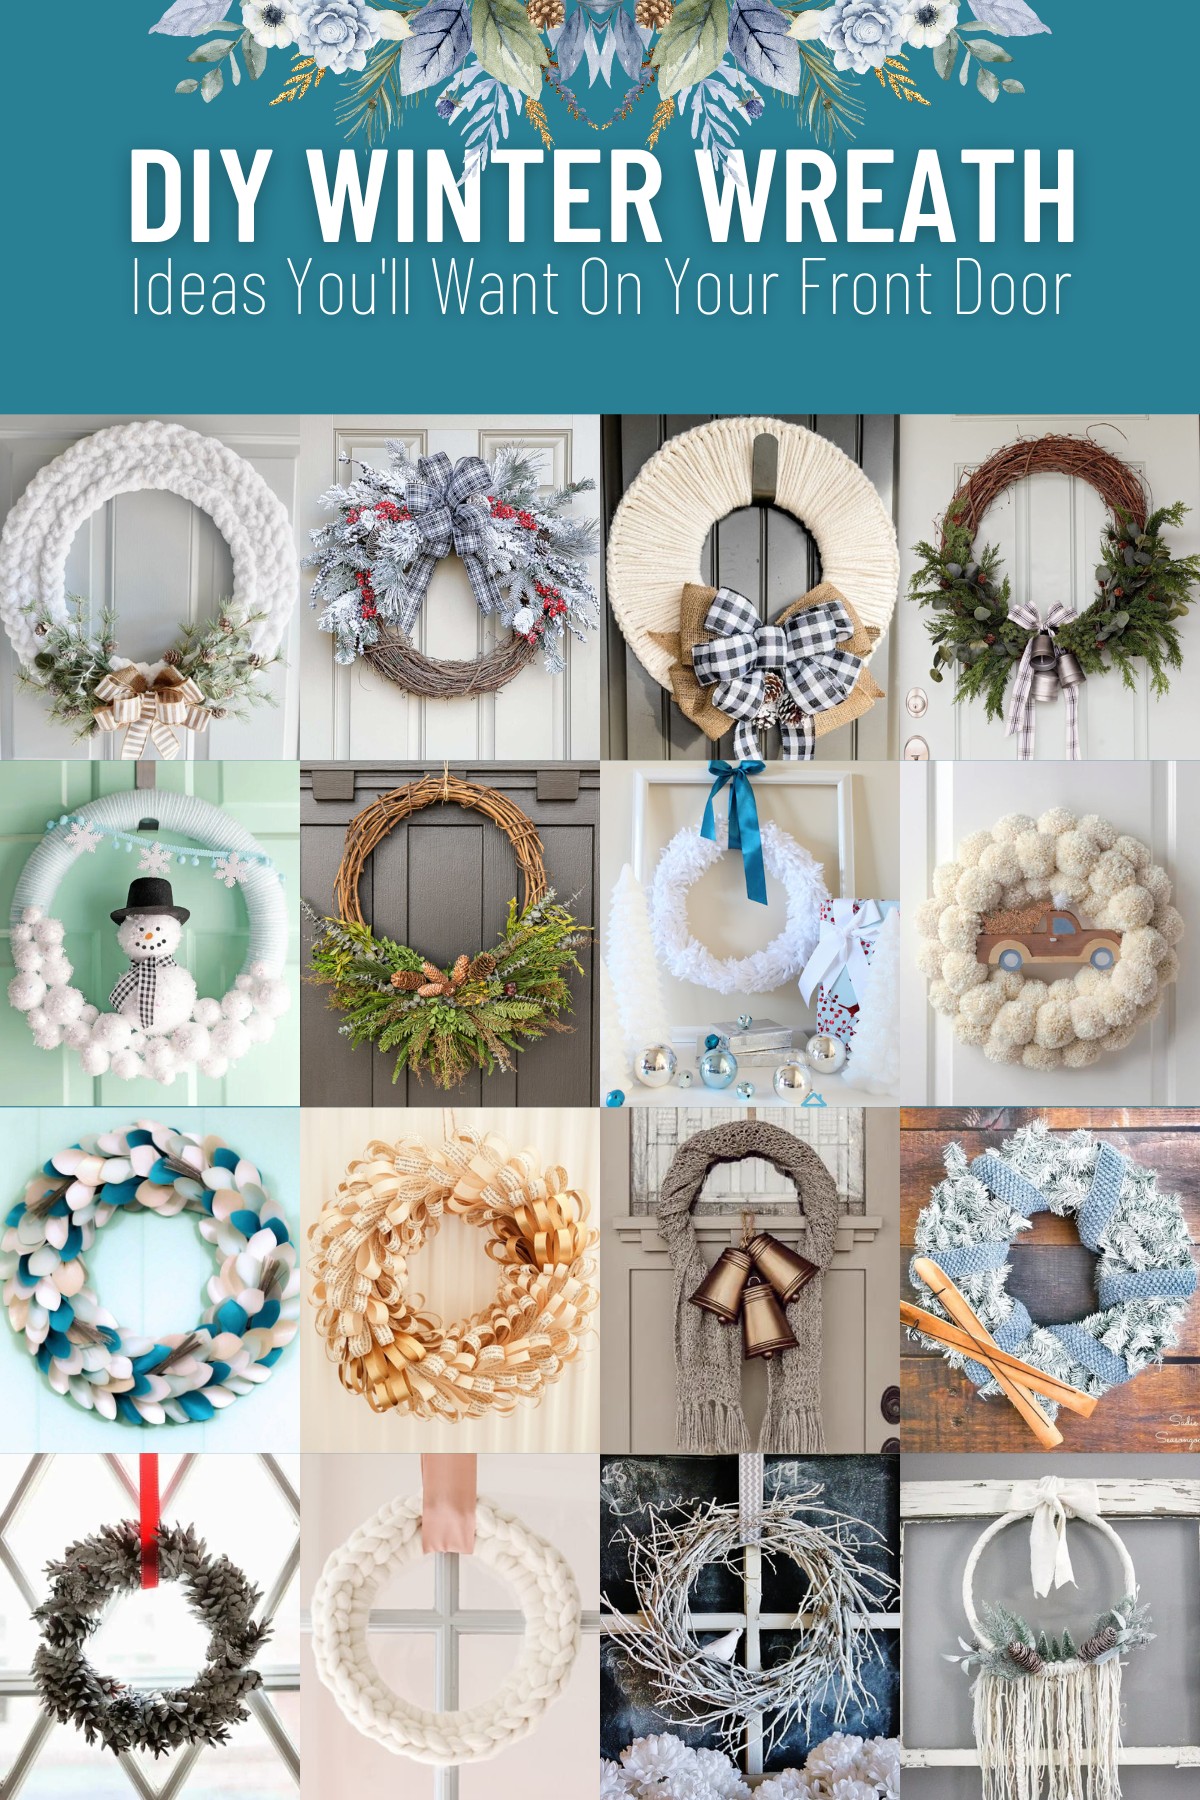 DIY Winter Wreath Ideas You'll Want on Your Front Door